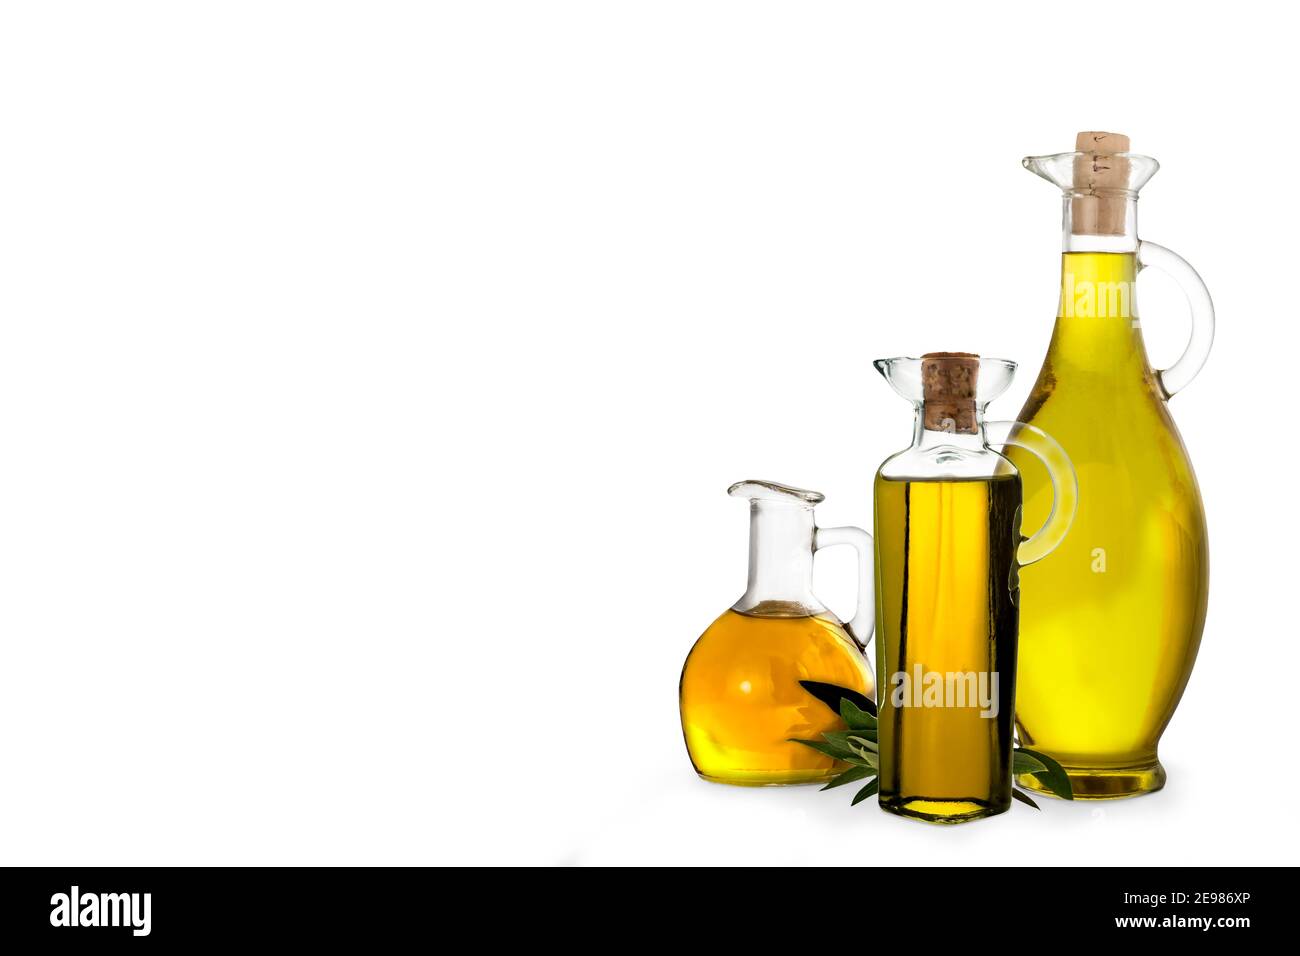 Extra virgin olive oil, three varieties of olive oil in bottles and glass jars isolated on white background. Stock Photo